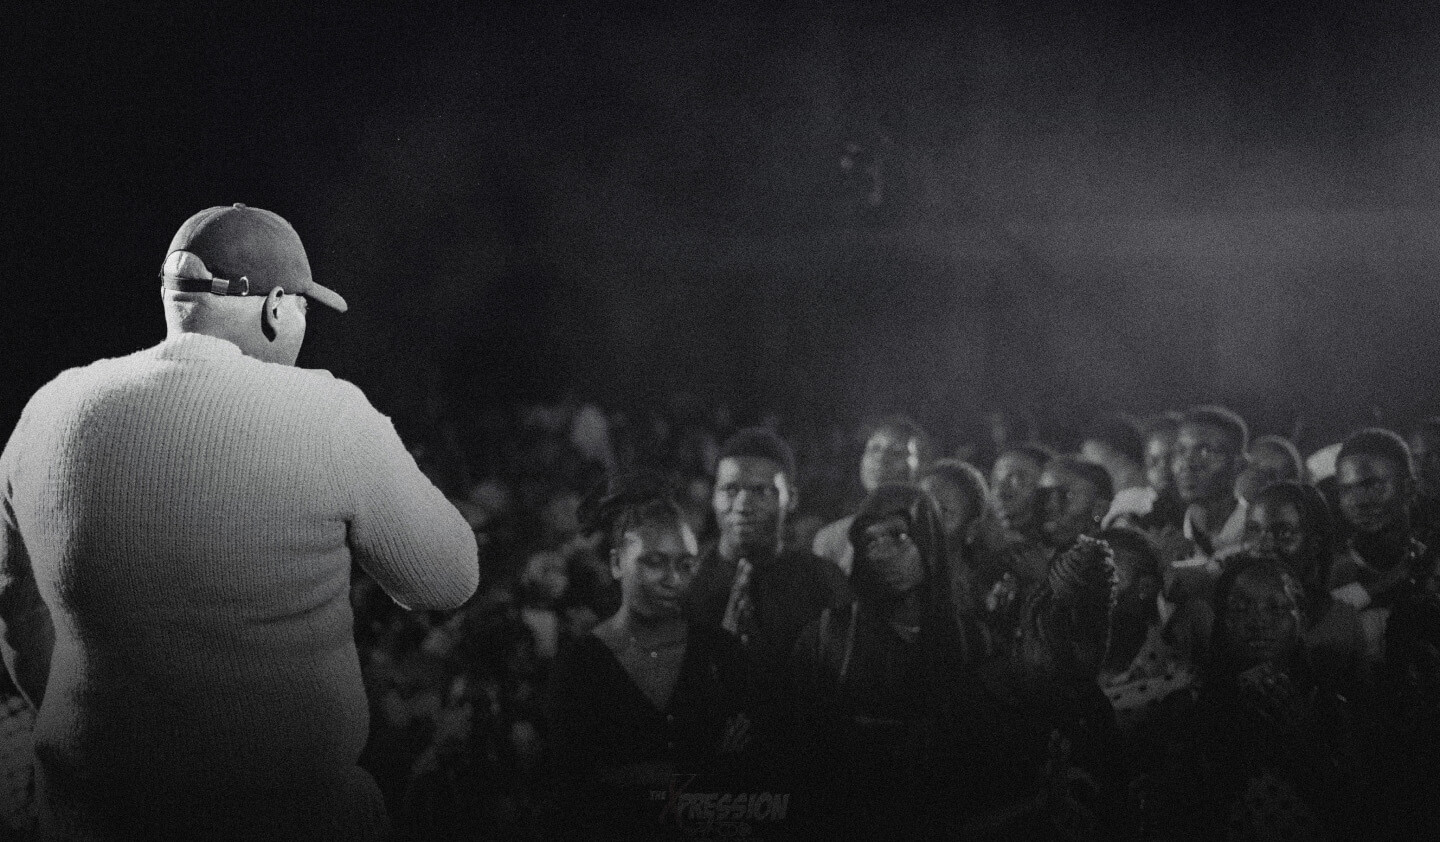 Black and white image of CDO on stage backing the camera and facing the stage